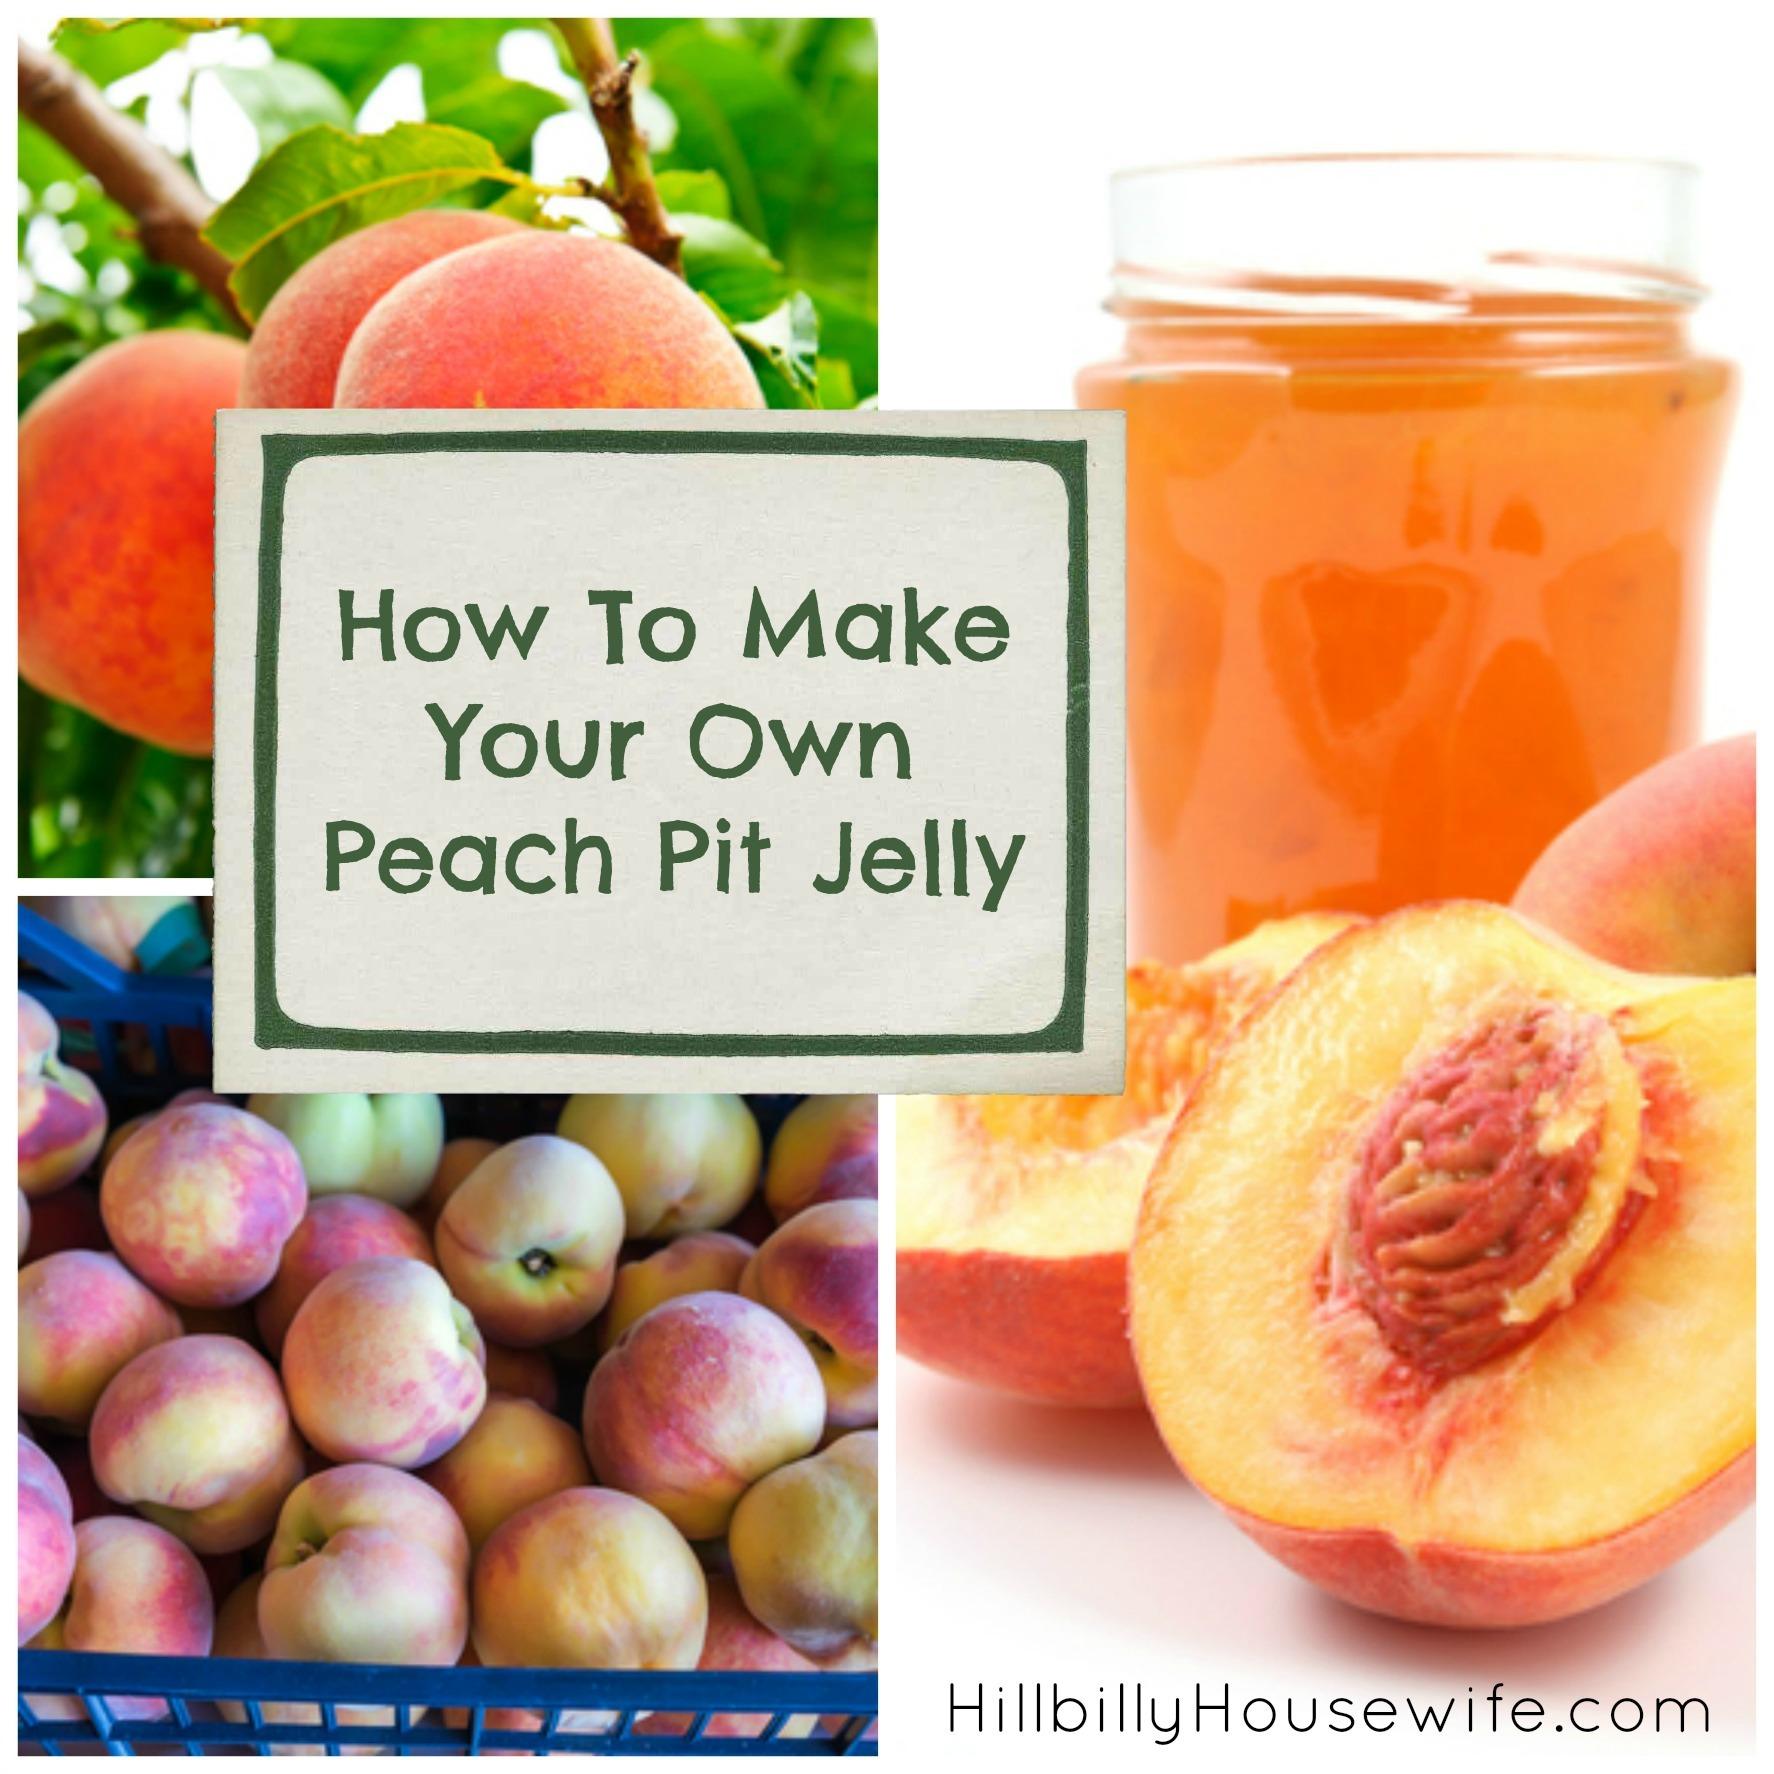 Peach Pit Jelly Hillbilly Housewife